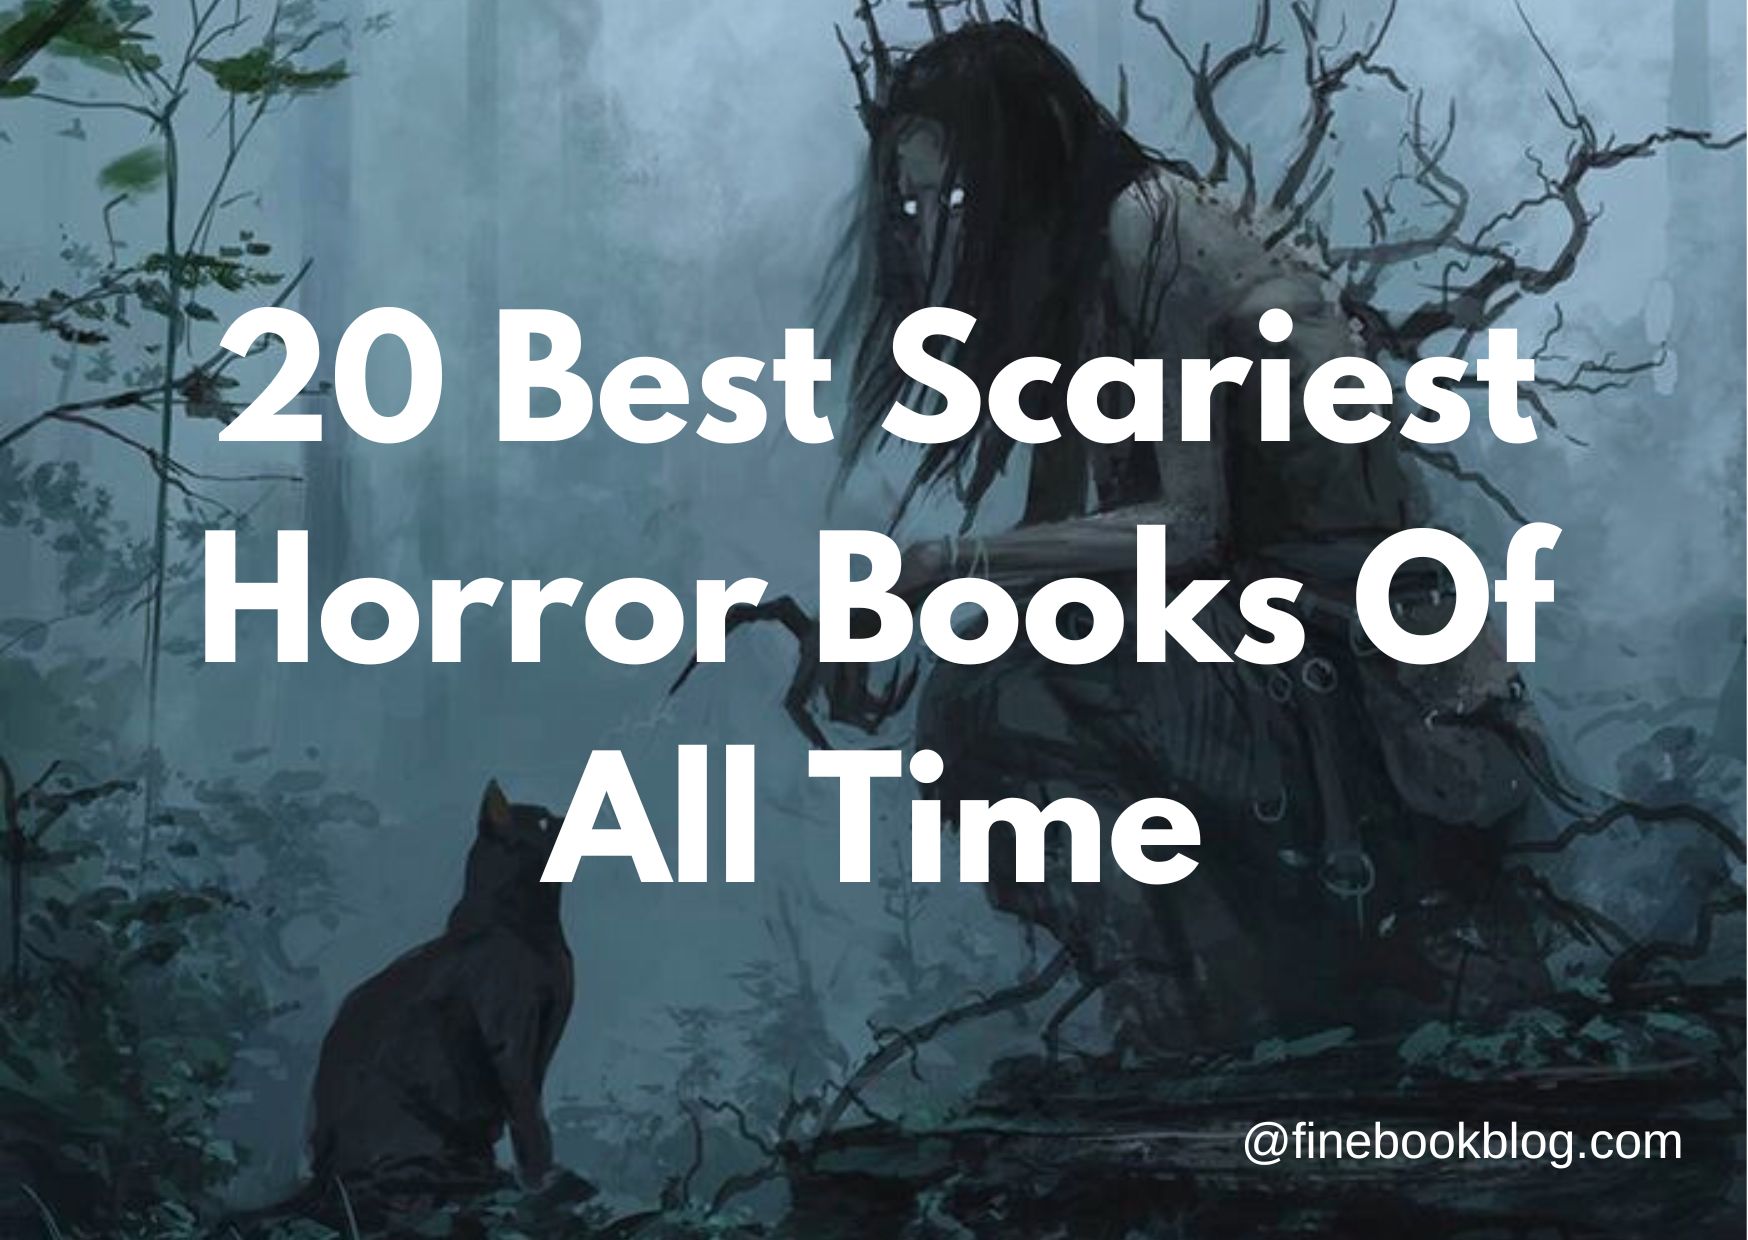 Best-scariest-horror-books-of-all-time